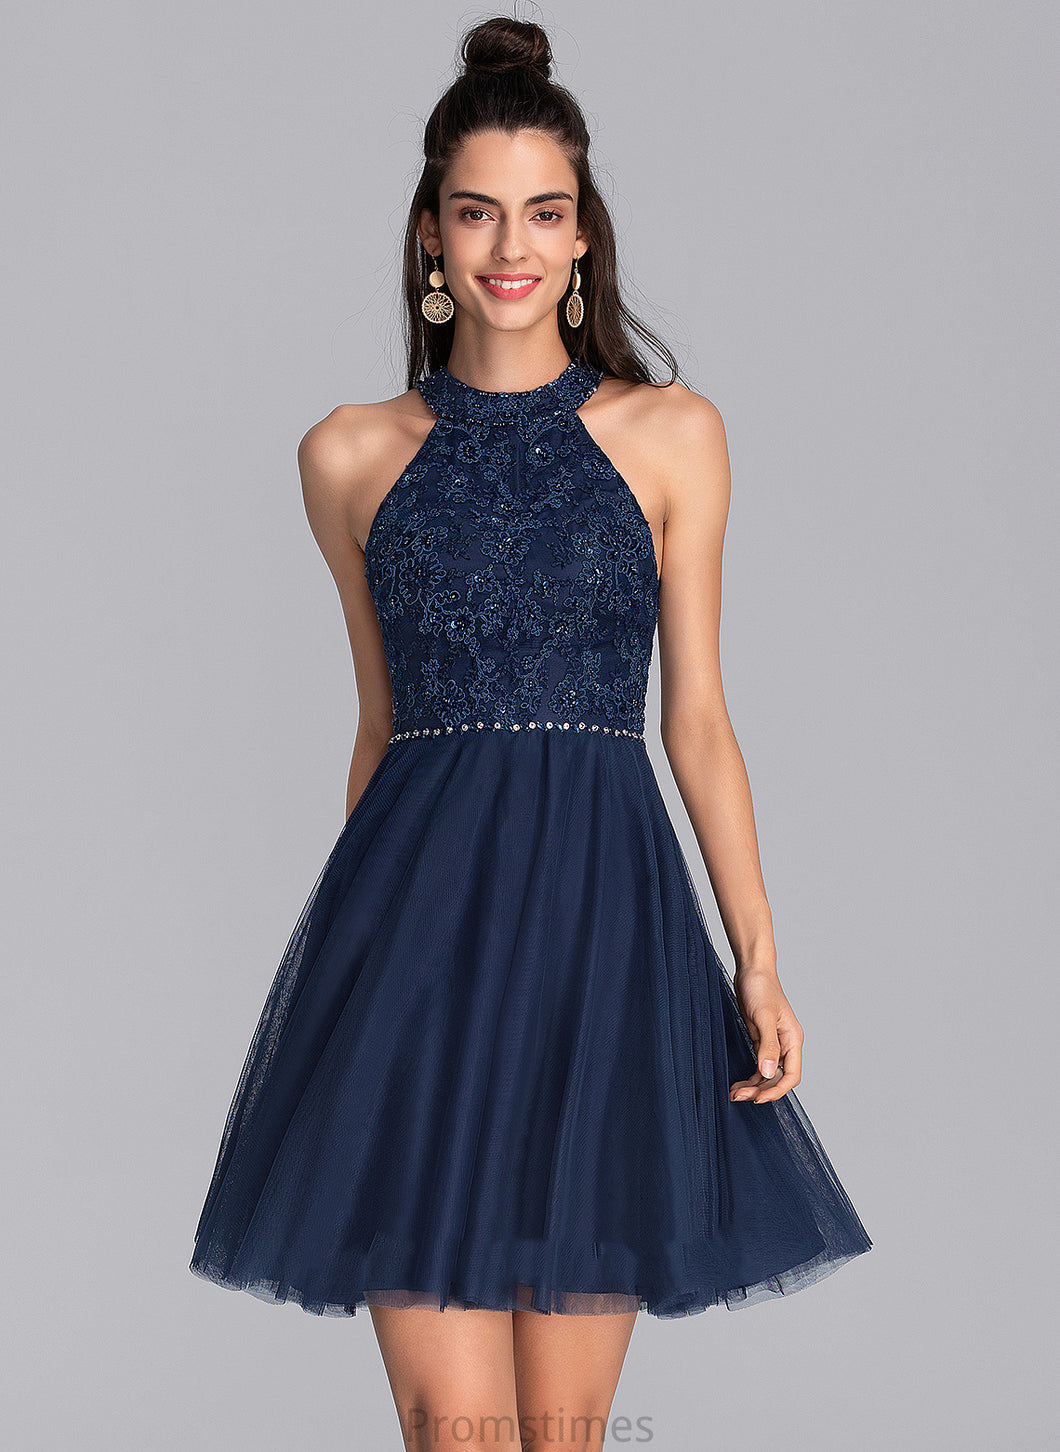 Homecoming A-Line Lace With Beading Neck Short/Mini Homecoming Dresses Scoop Dress Keyla Tulle